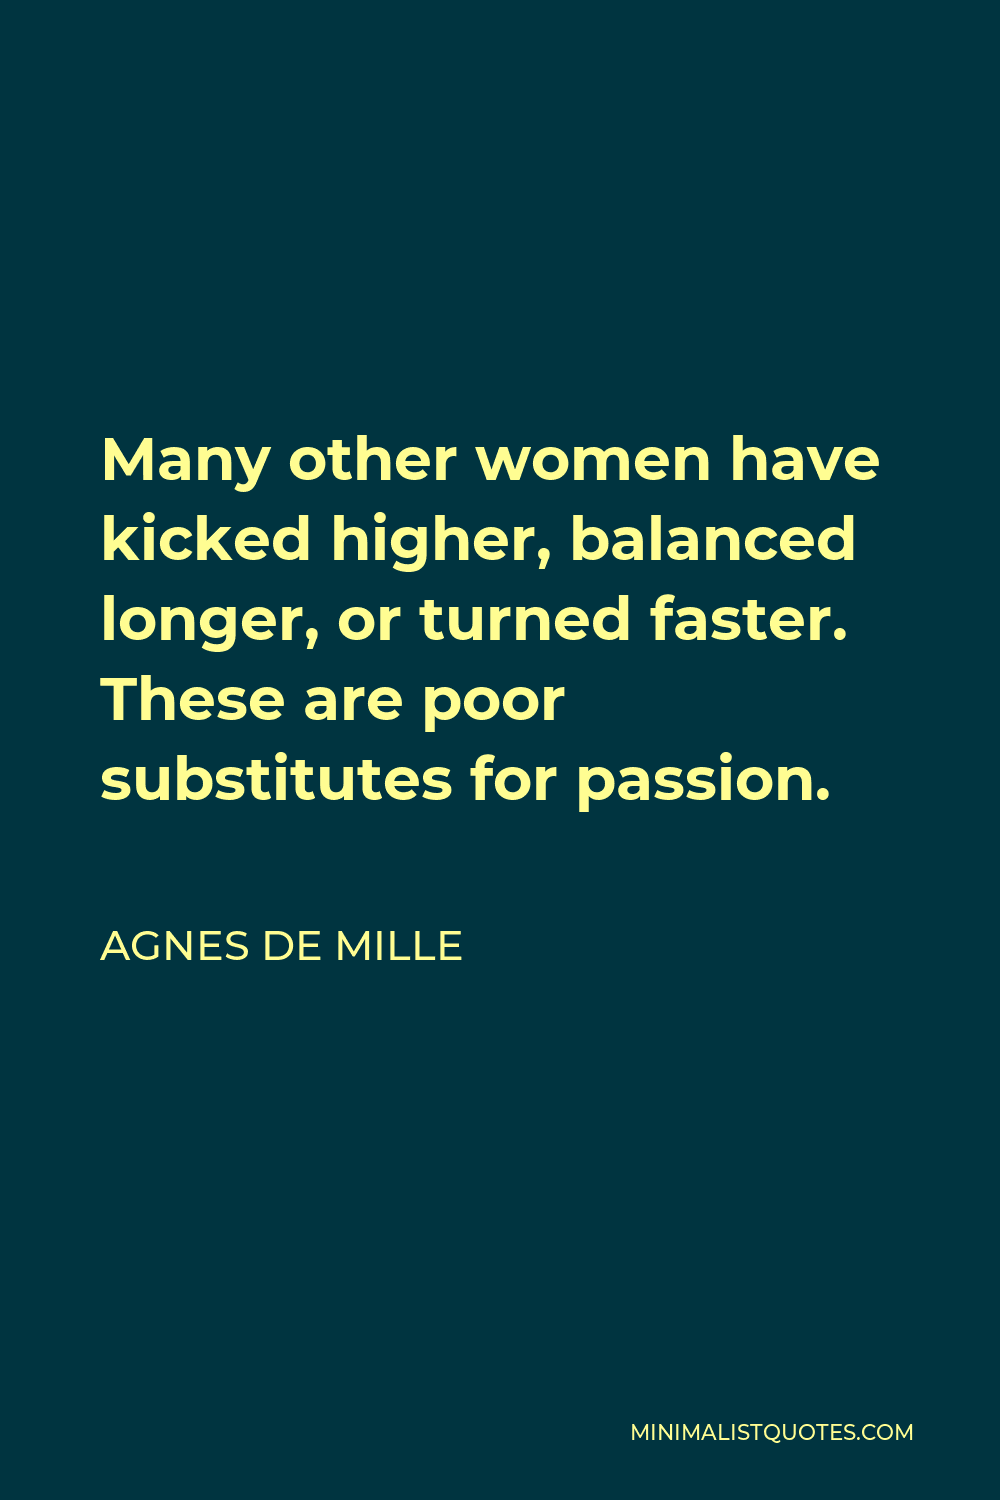 Agnes de Mille Quote - Many other women have kicked higher, balanced longer, or turned faster. These are poor substitutes for passion.